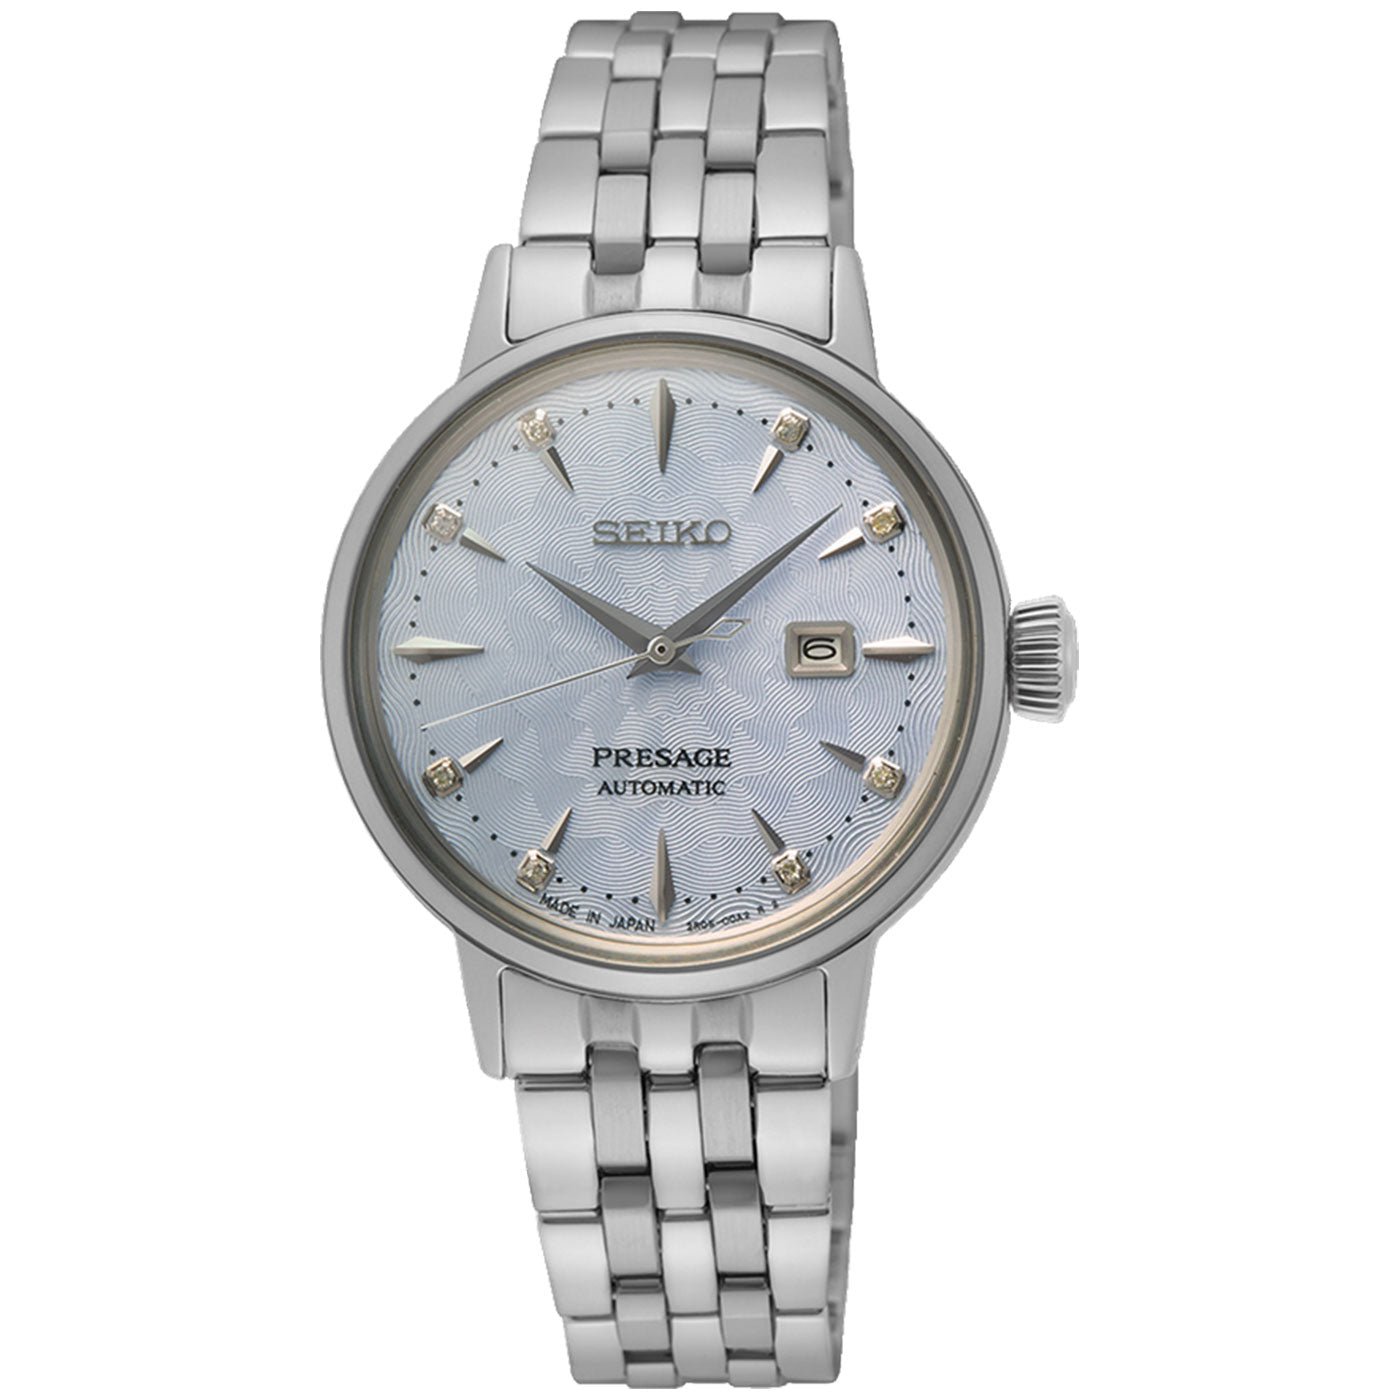 Seiko Presage Cocktail Time Automatic with Manual Winding 37mm Watch